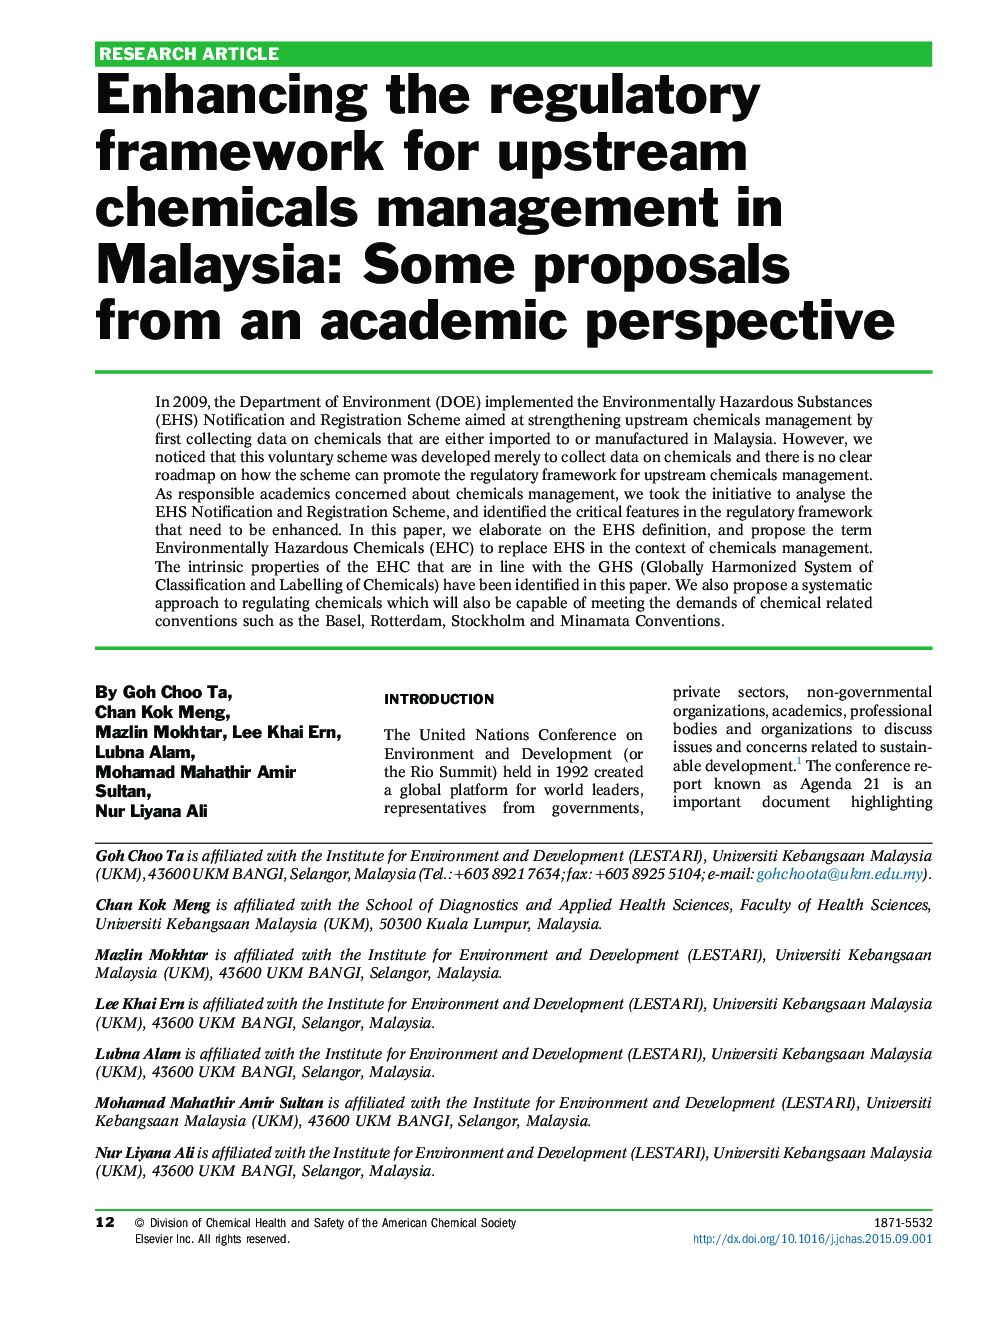 Enhancing the regulatory framework for upstream chemicals management in Malaysia: Some proposals from an academic perspective